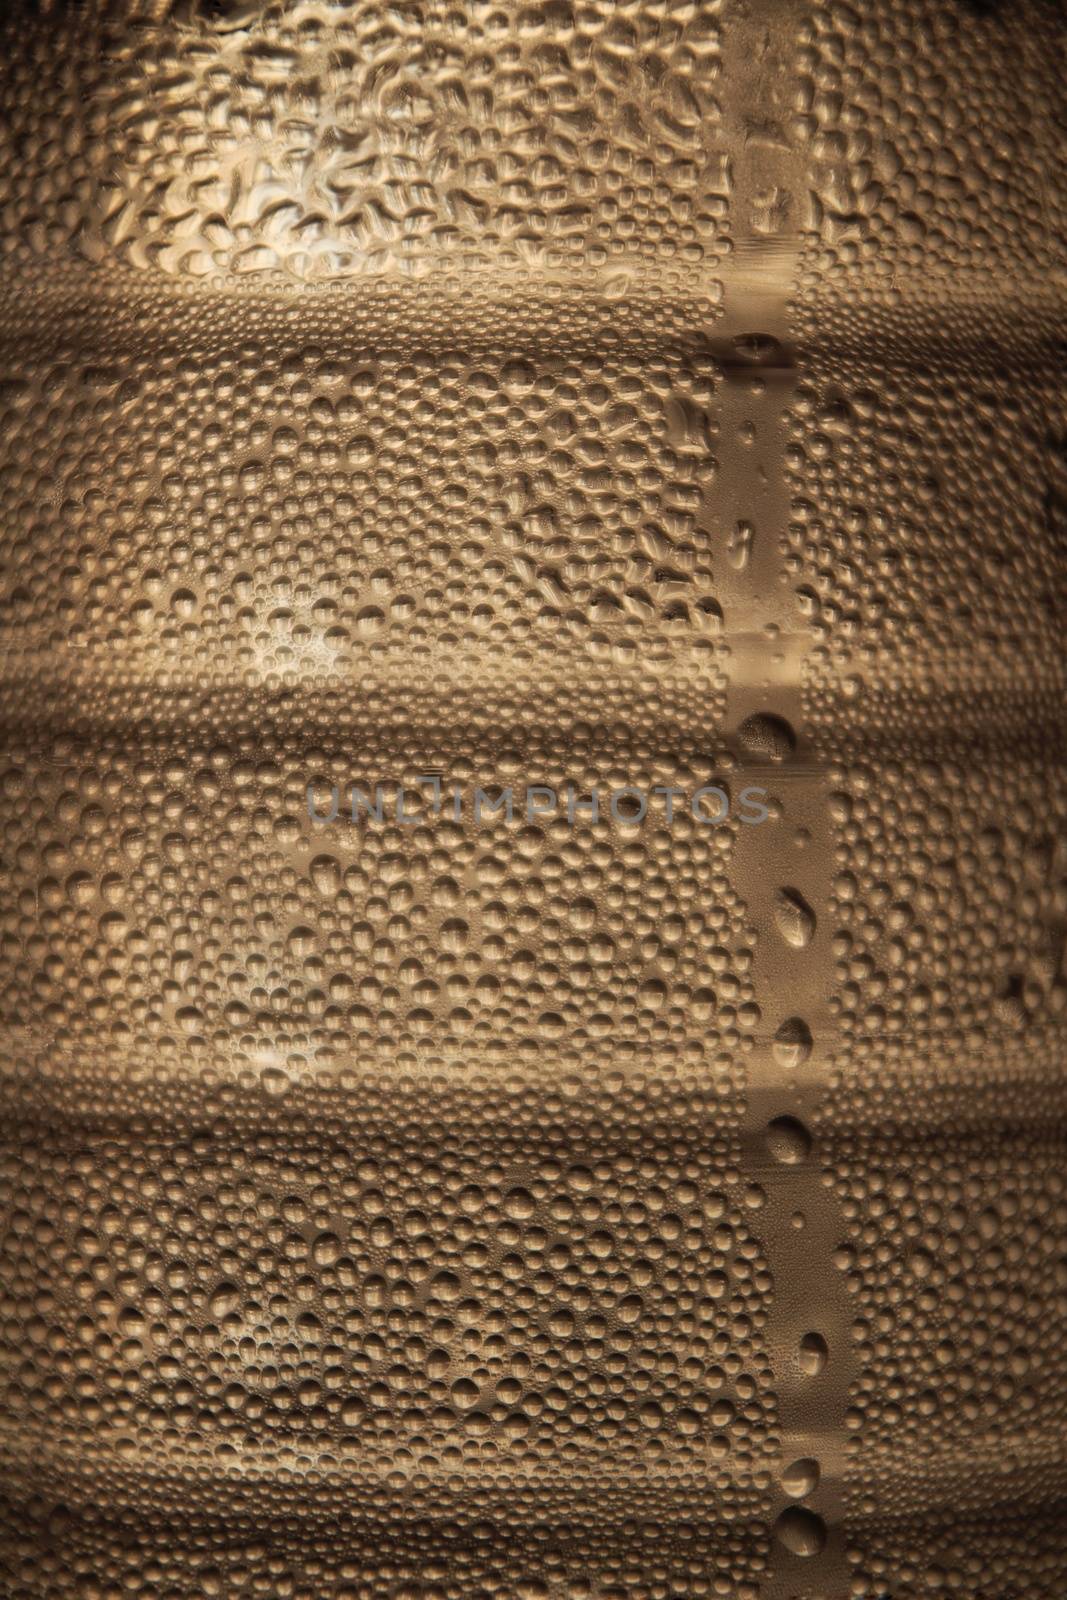 Plastic bottle texture with condensed drops. Background image.